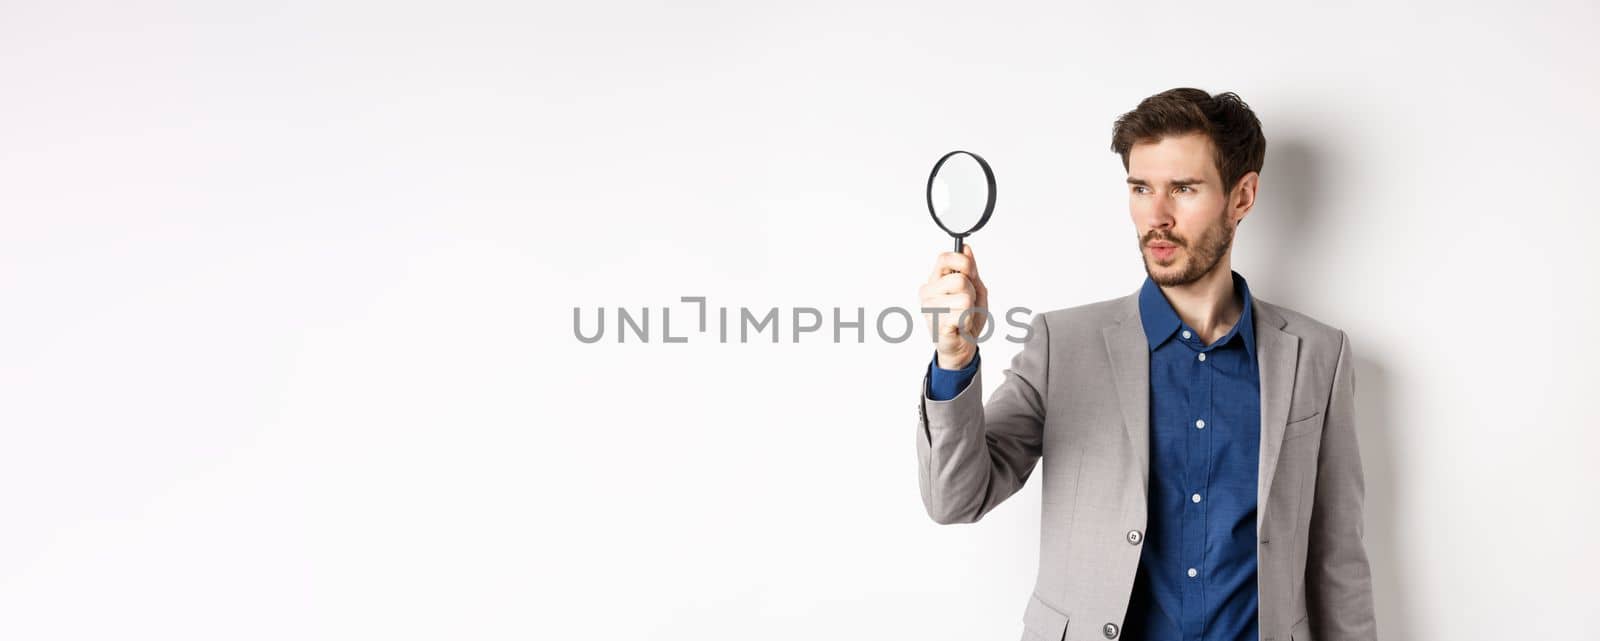 Serious man in suit searching for clues through magnifying glass, investigating, standing on white background.